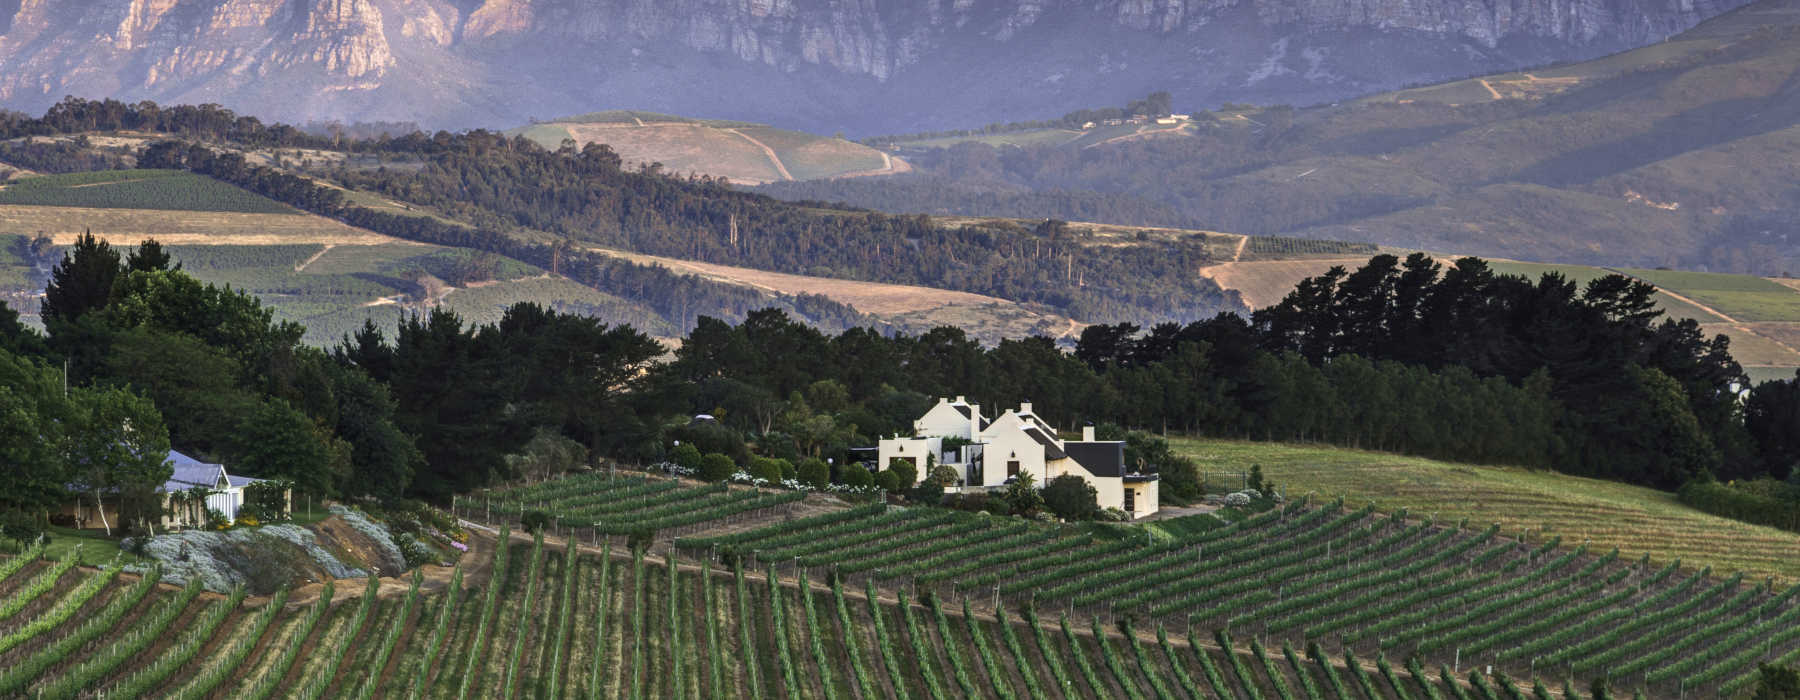  The Winelands and Cape Holidays